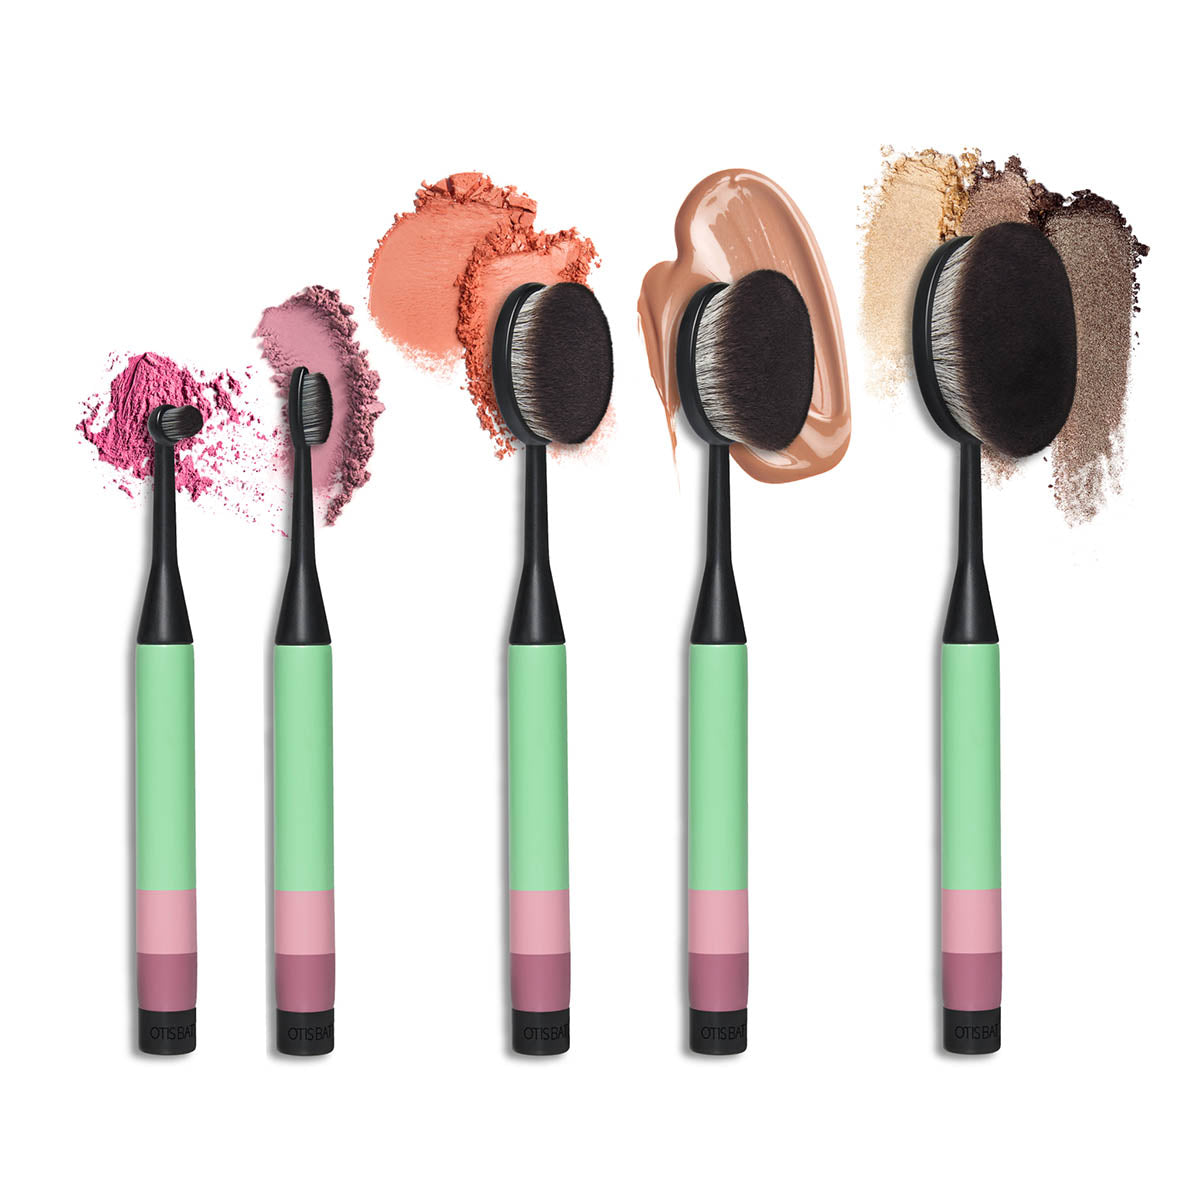 Otis Batterbee High Quality Makeup Brushes – The clever bristles pick up just the right amount of powder and product for a natural and flawless finish.